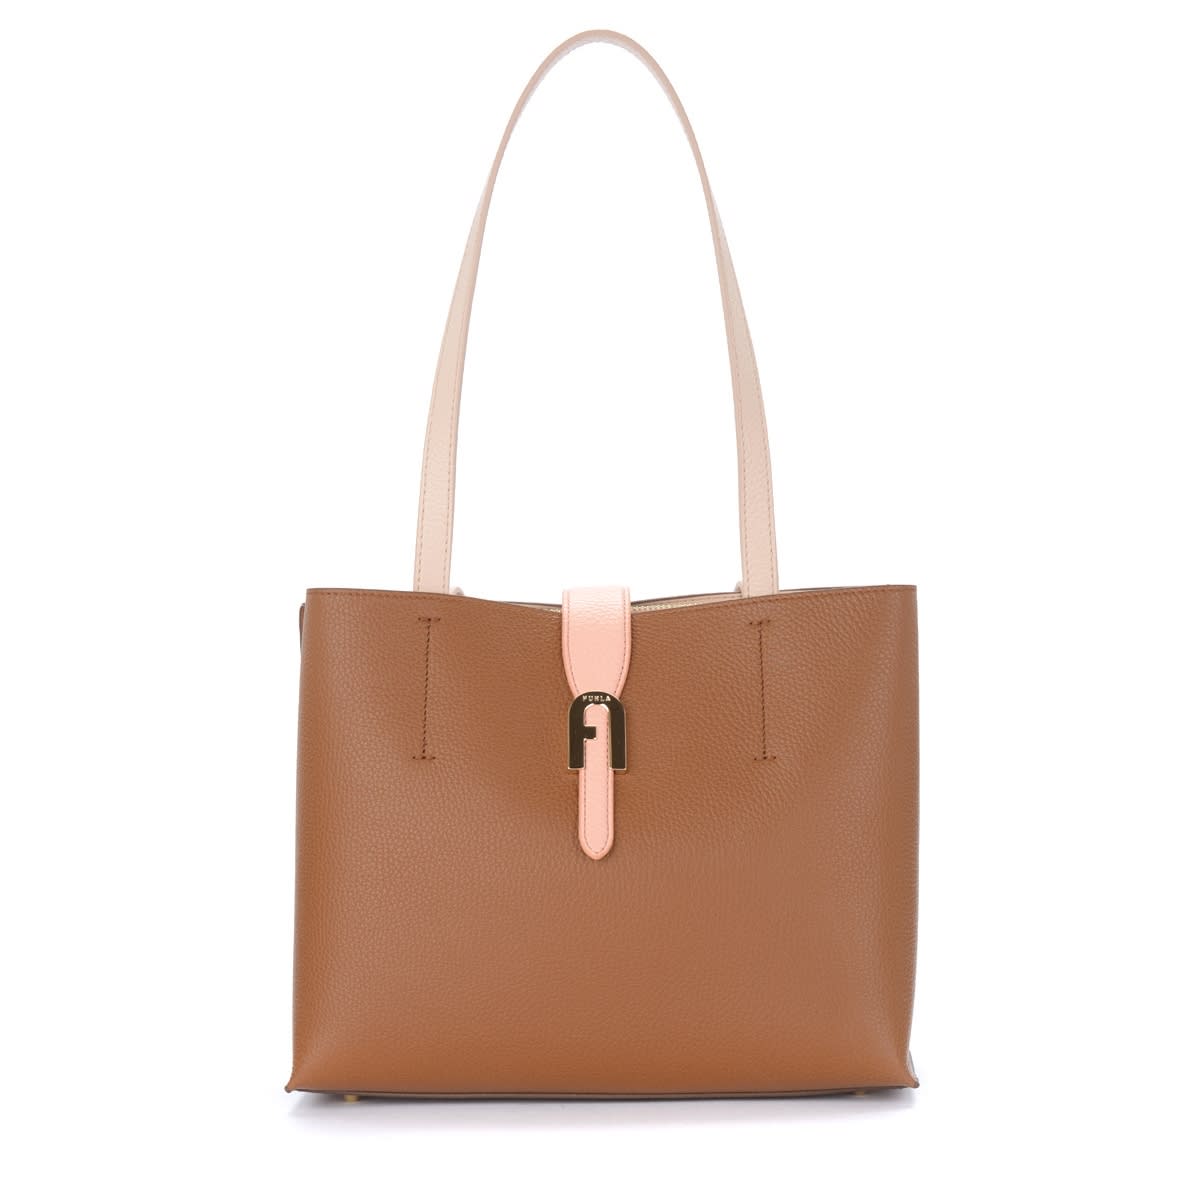 Furla Sofia M Shopping Bag In Leather Color Leather